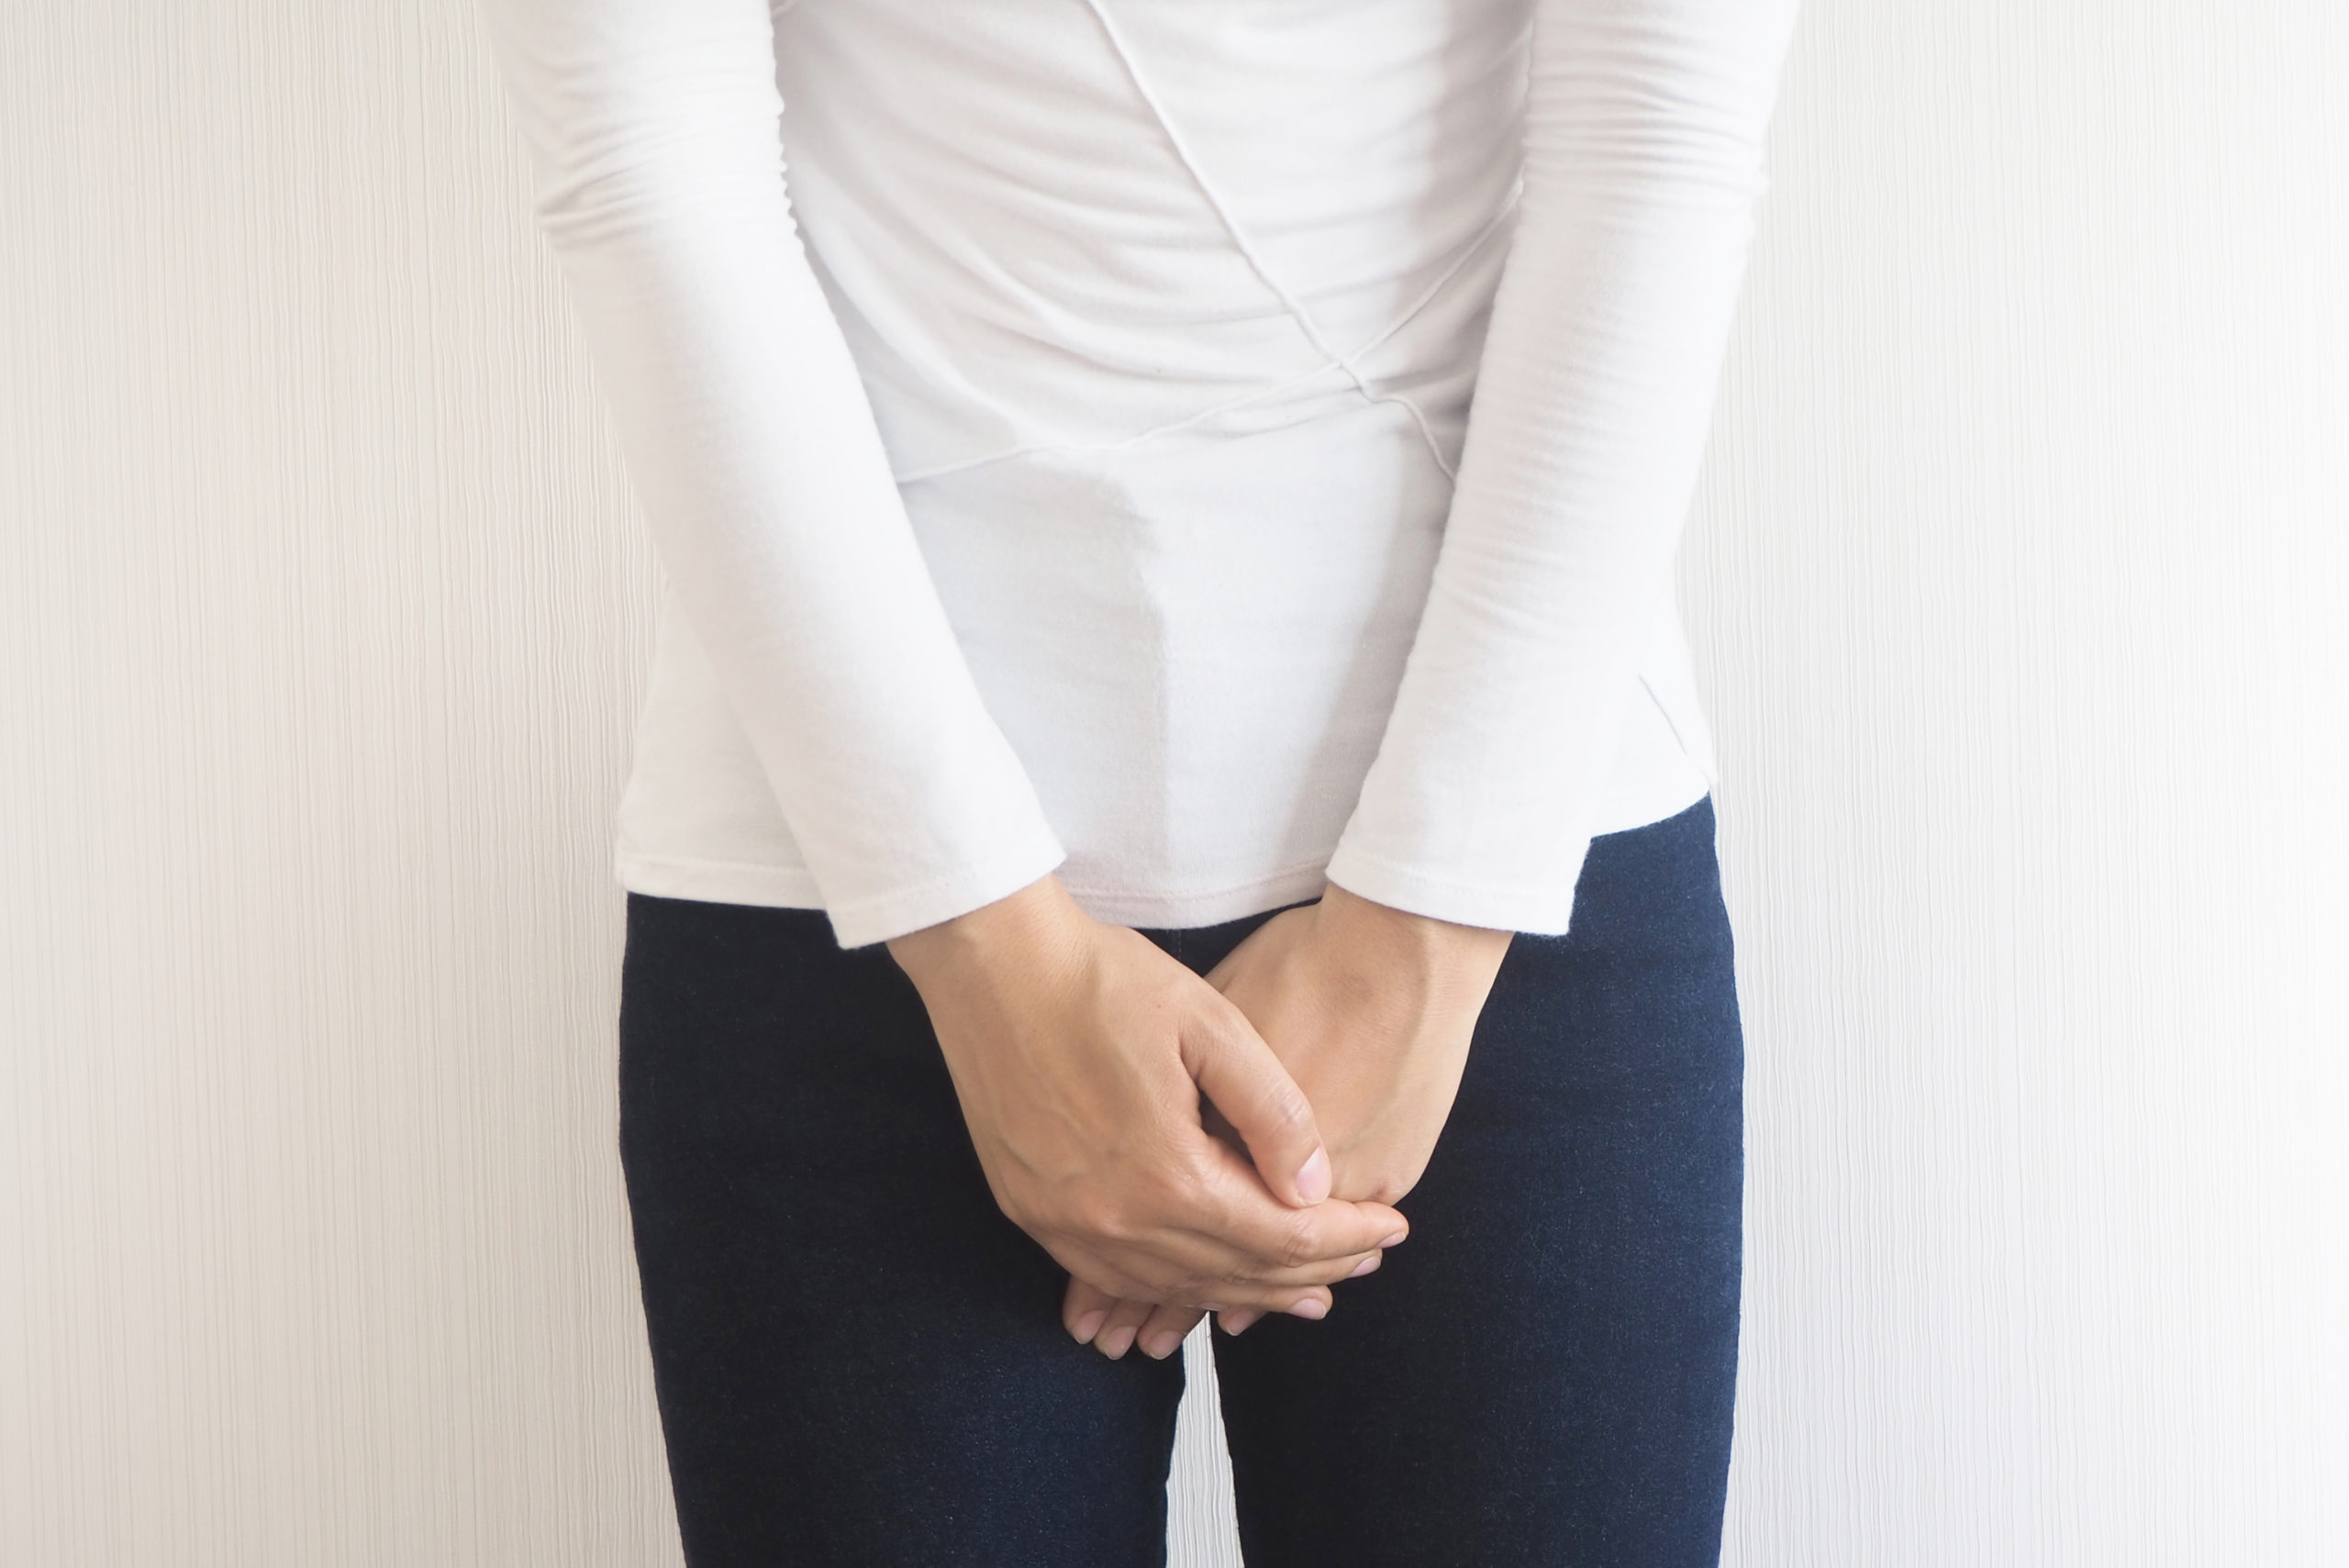 6 Tips to Promote a Healthy Bladder